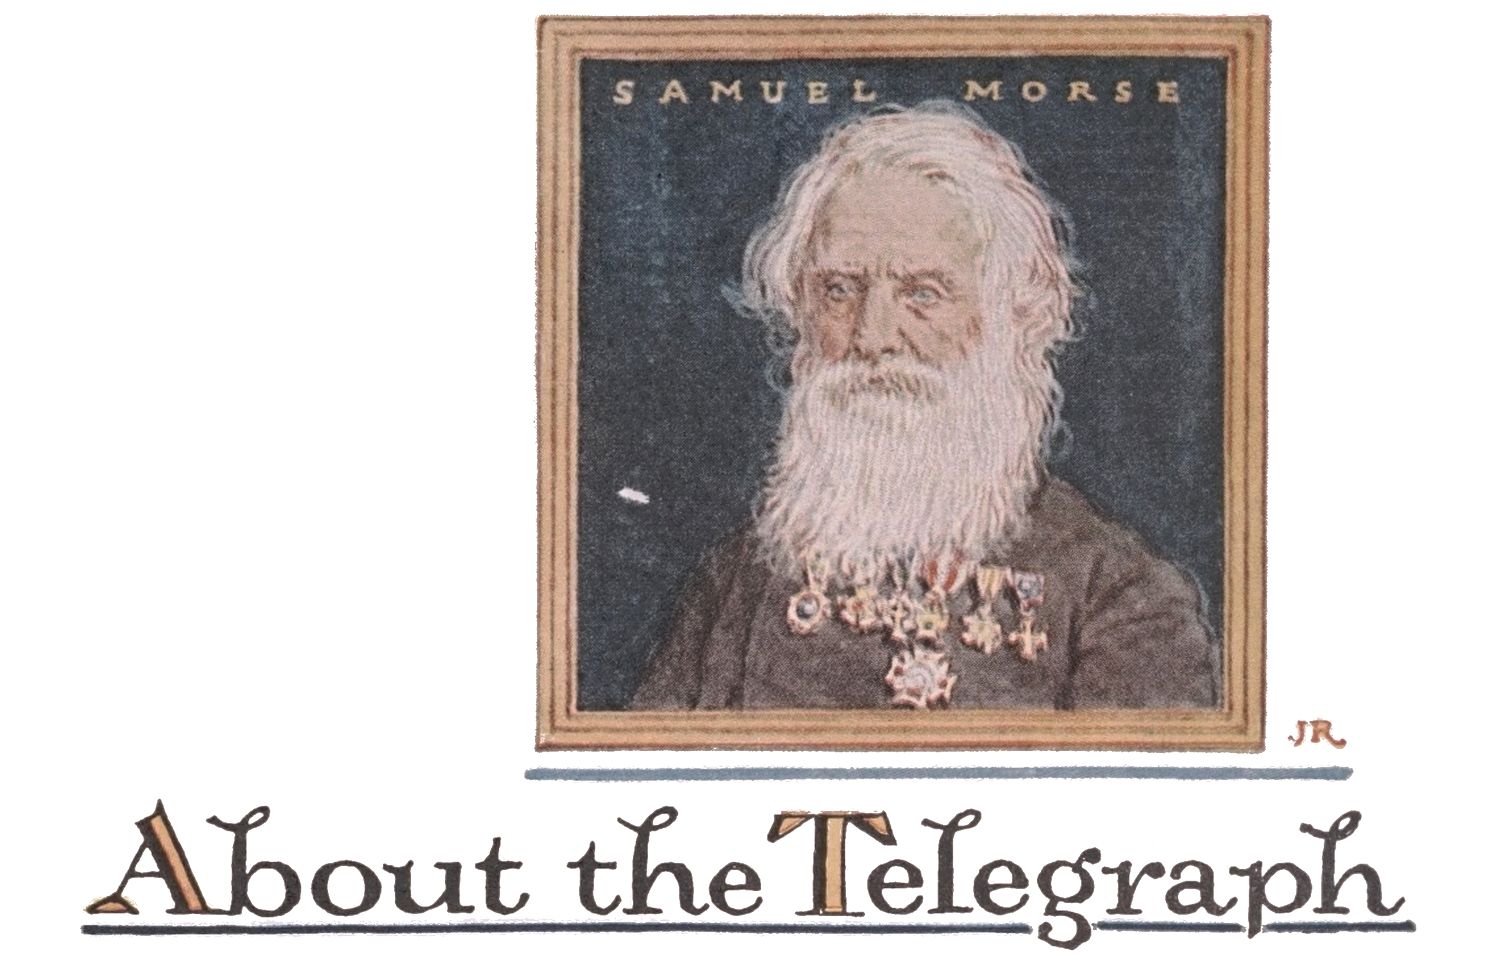 About the Telegraph